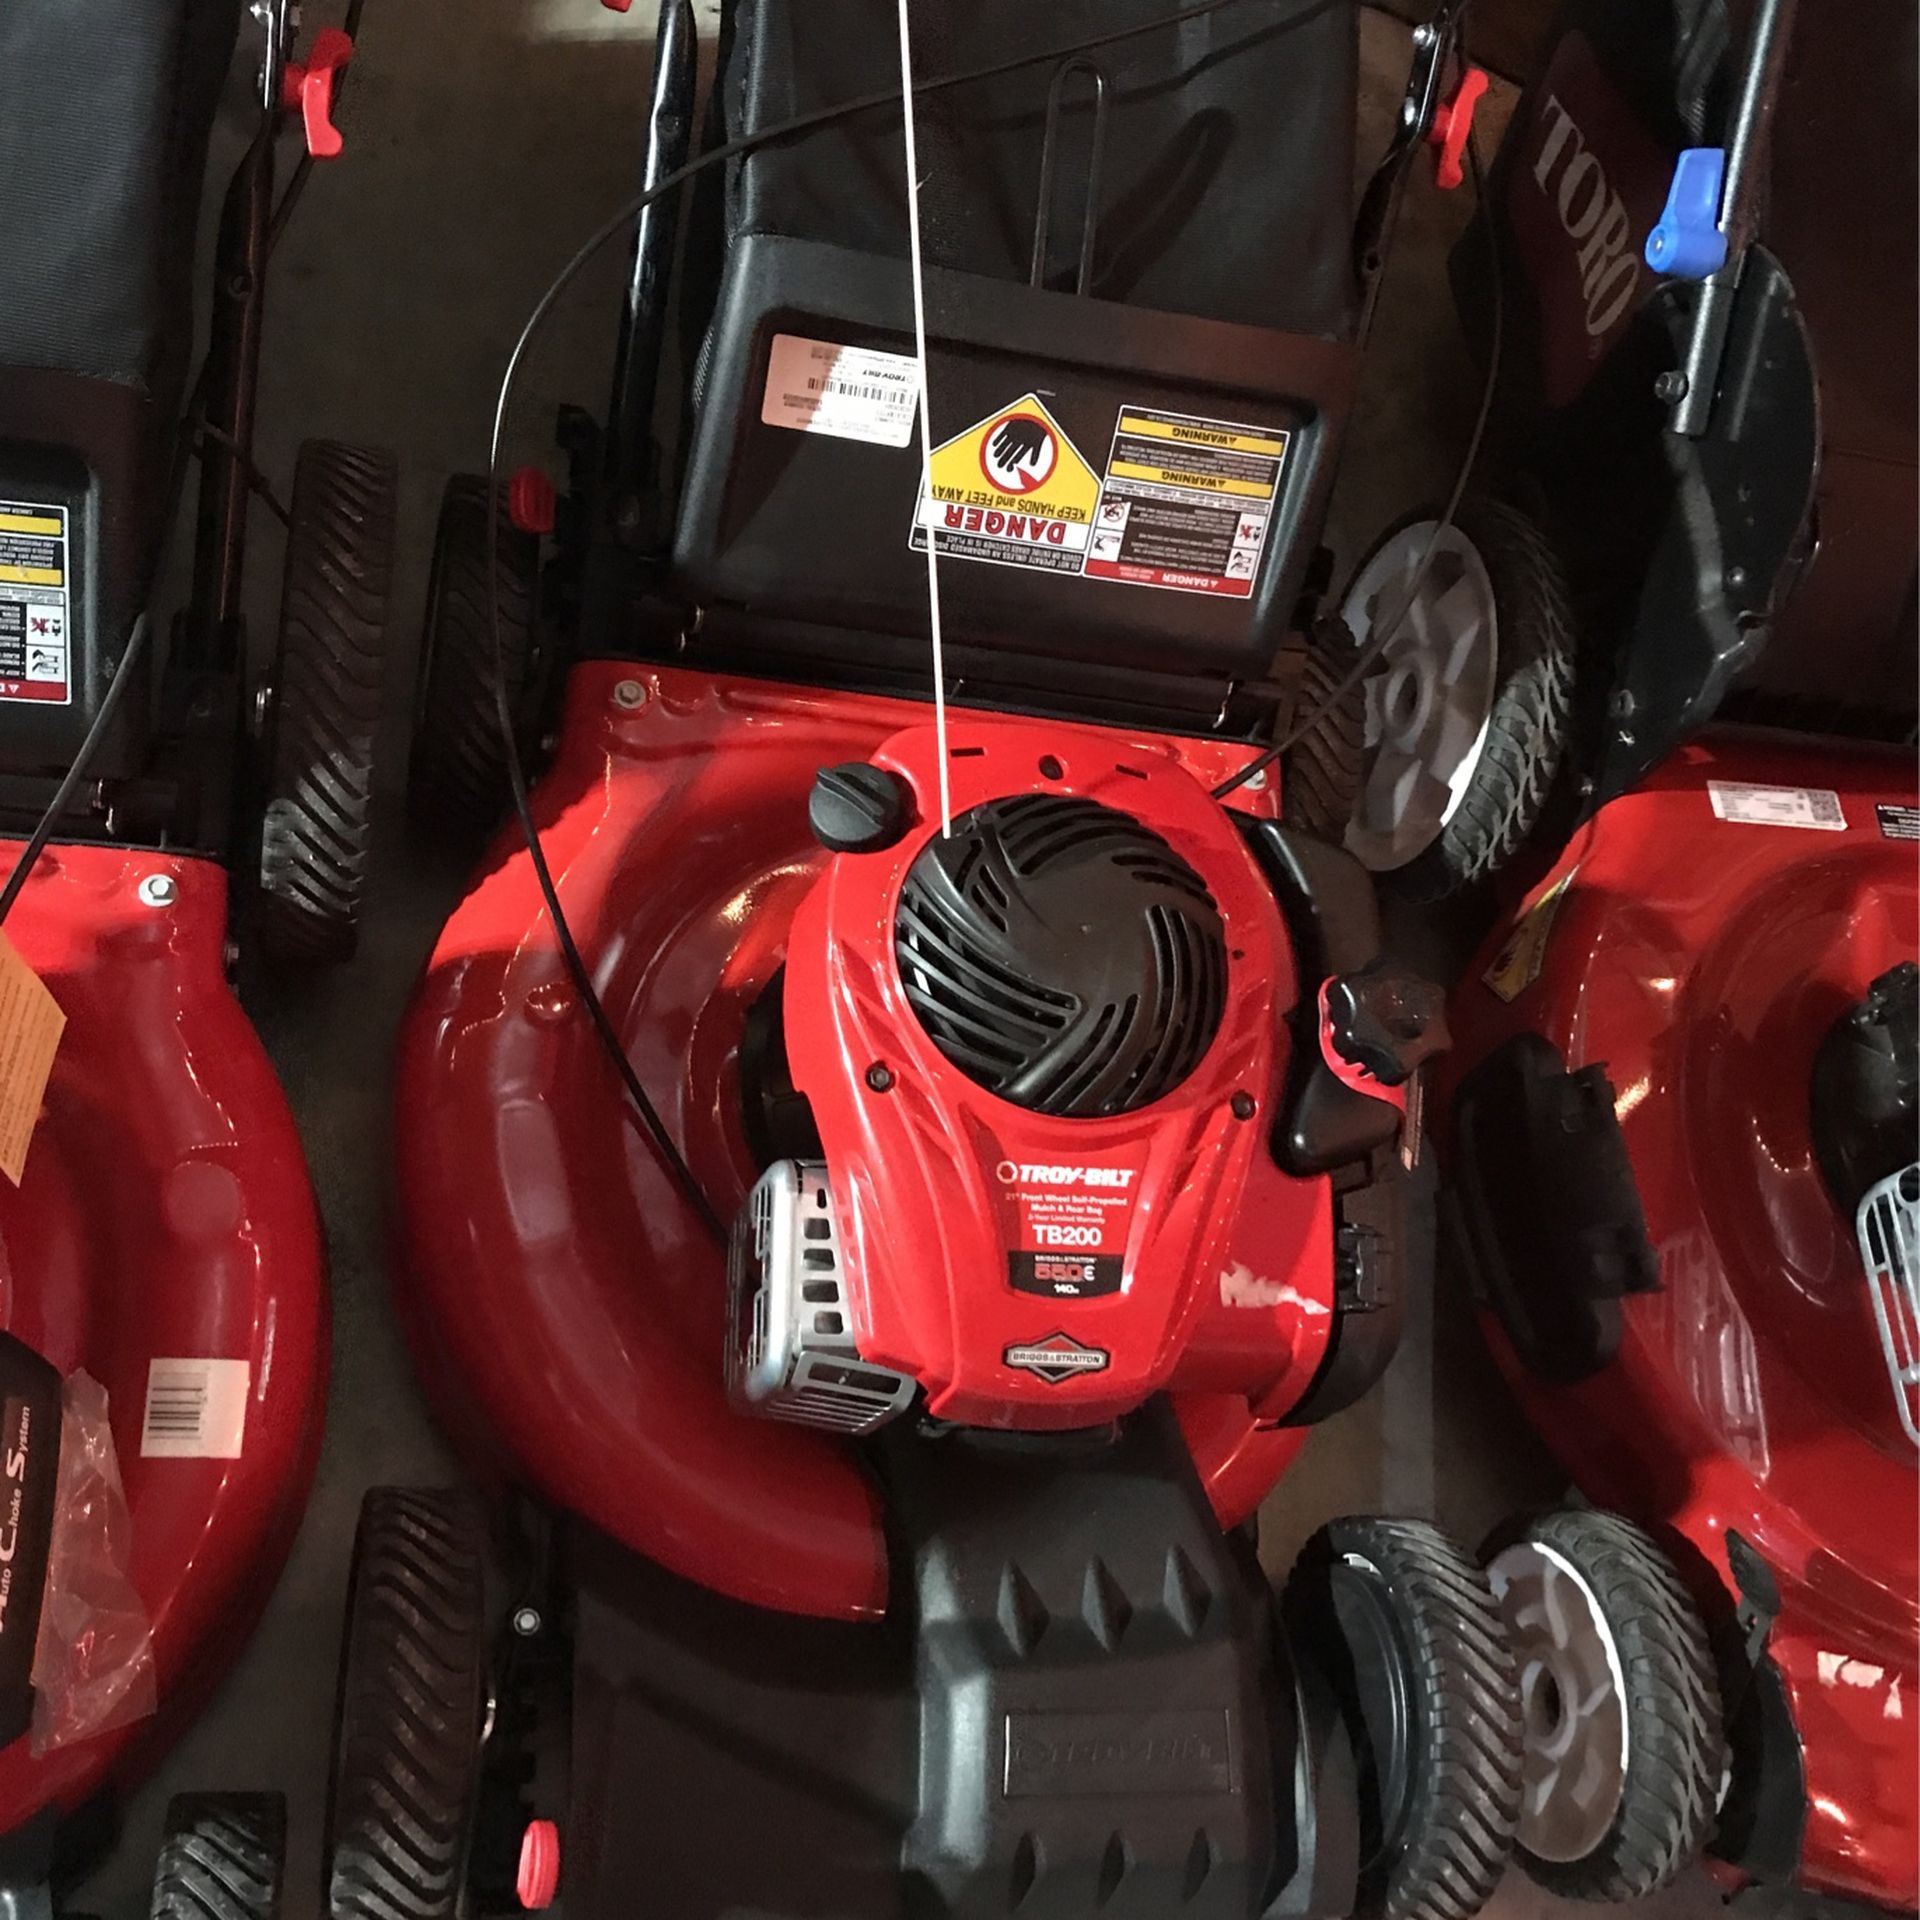 Lawn Mowers for Sale in Tulare, CA - OfferUp